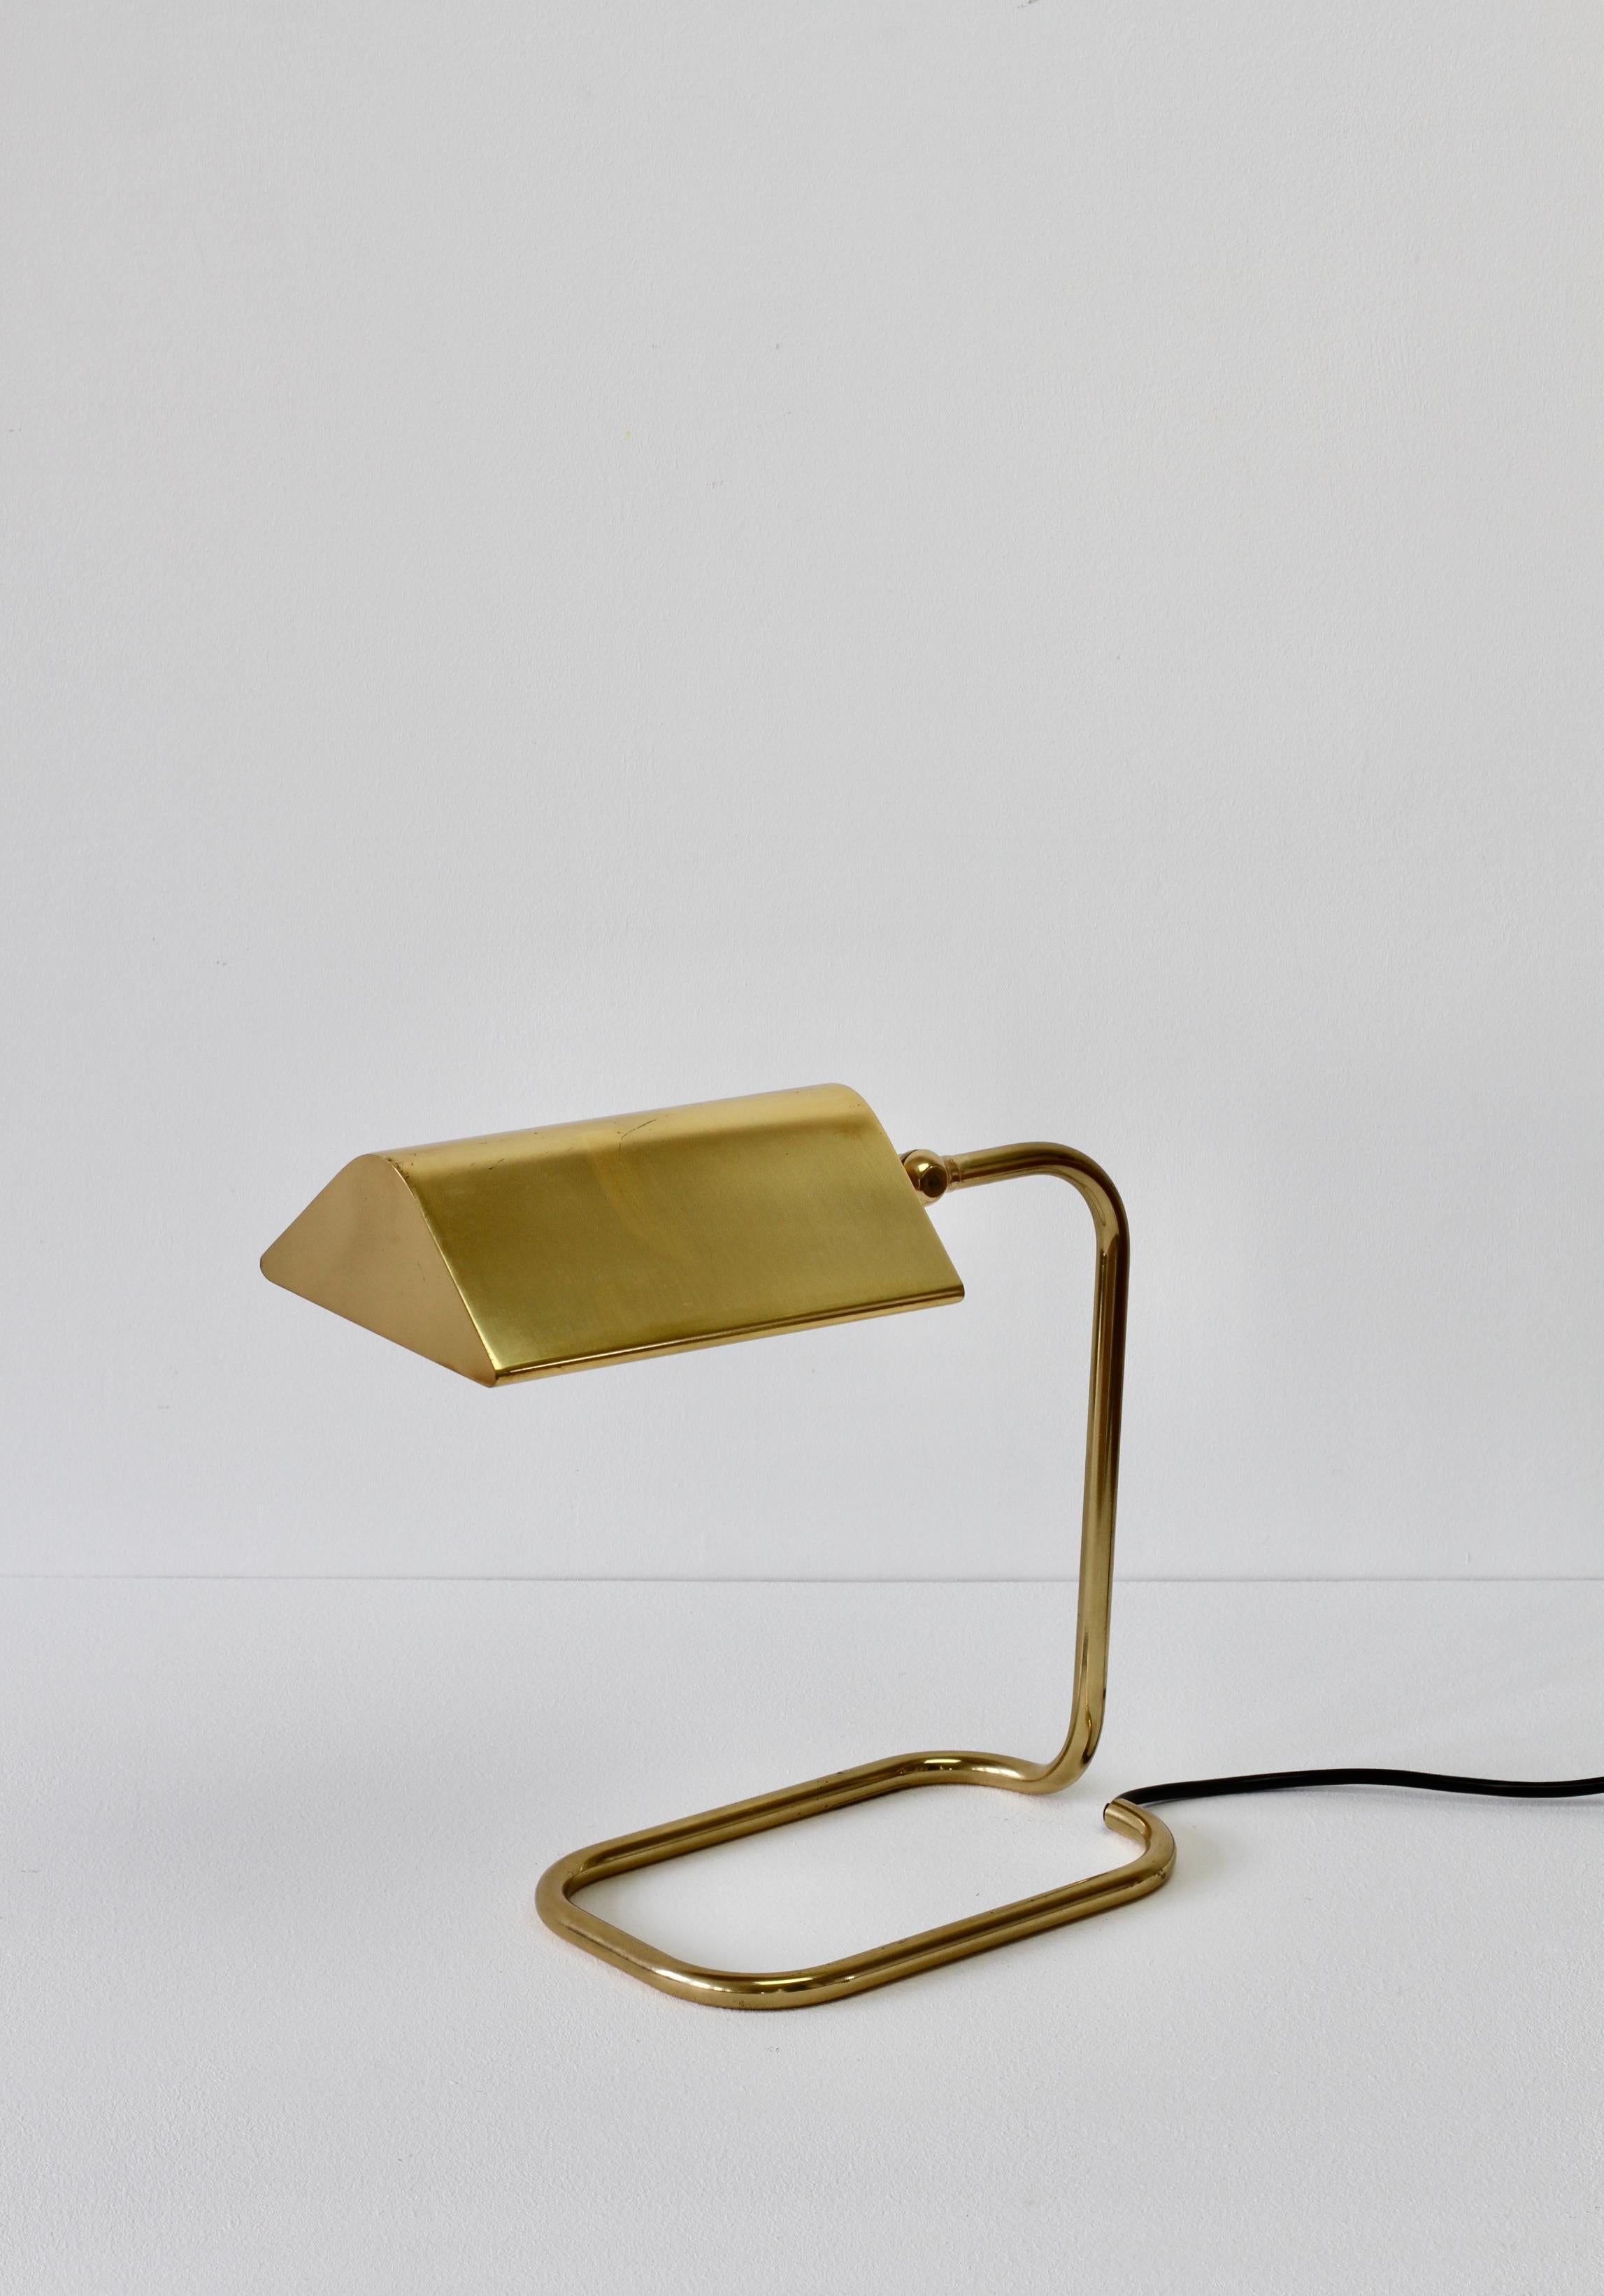 Wonderful Mid-Century Modern vintage German table lamp or desk lamp model 'Cervantes' designed by Florian Schulz in the 1970s. This lamp was made circa 1980s/1990s and was produced by Reim Interline. Featuring lacquered polished brass with